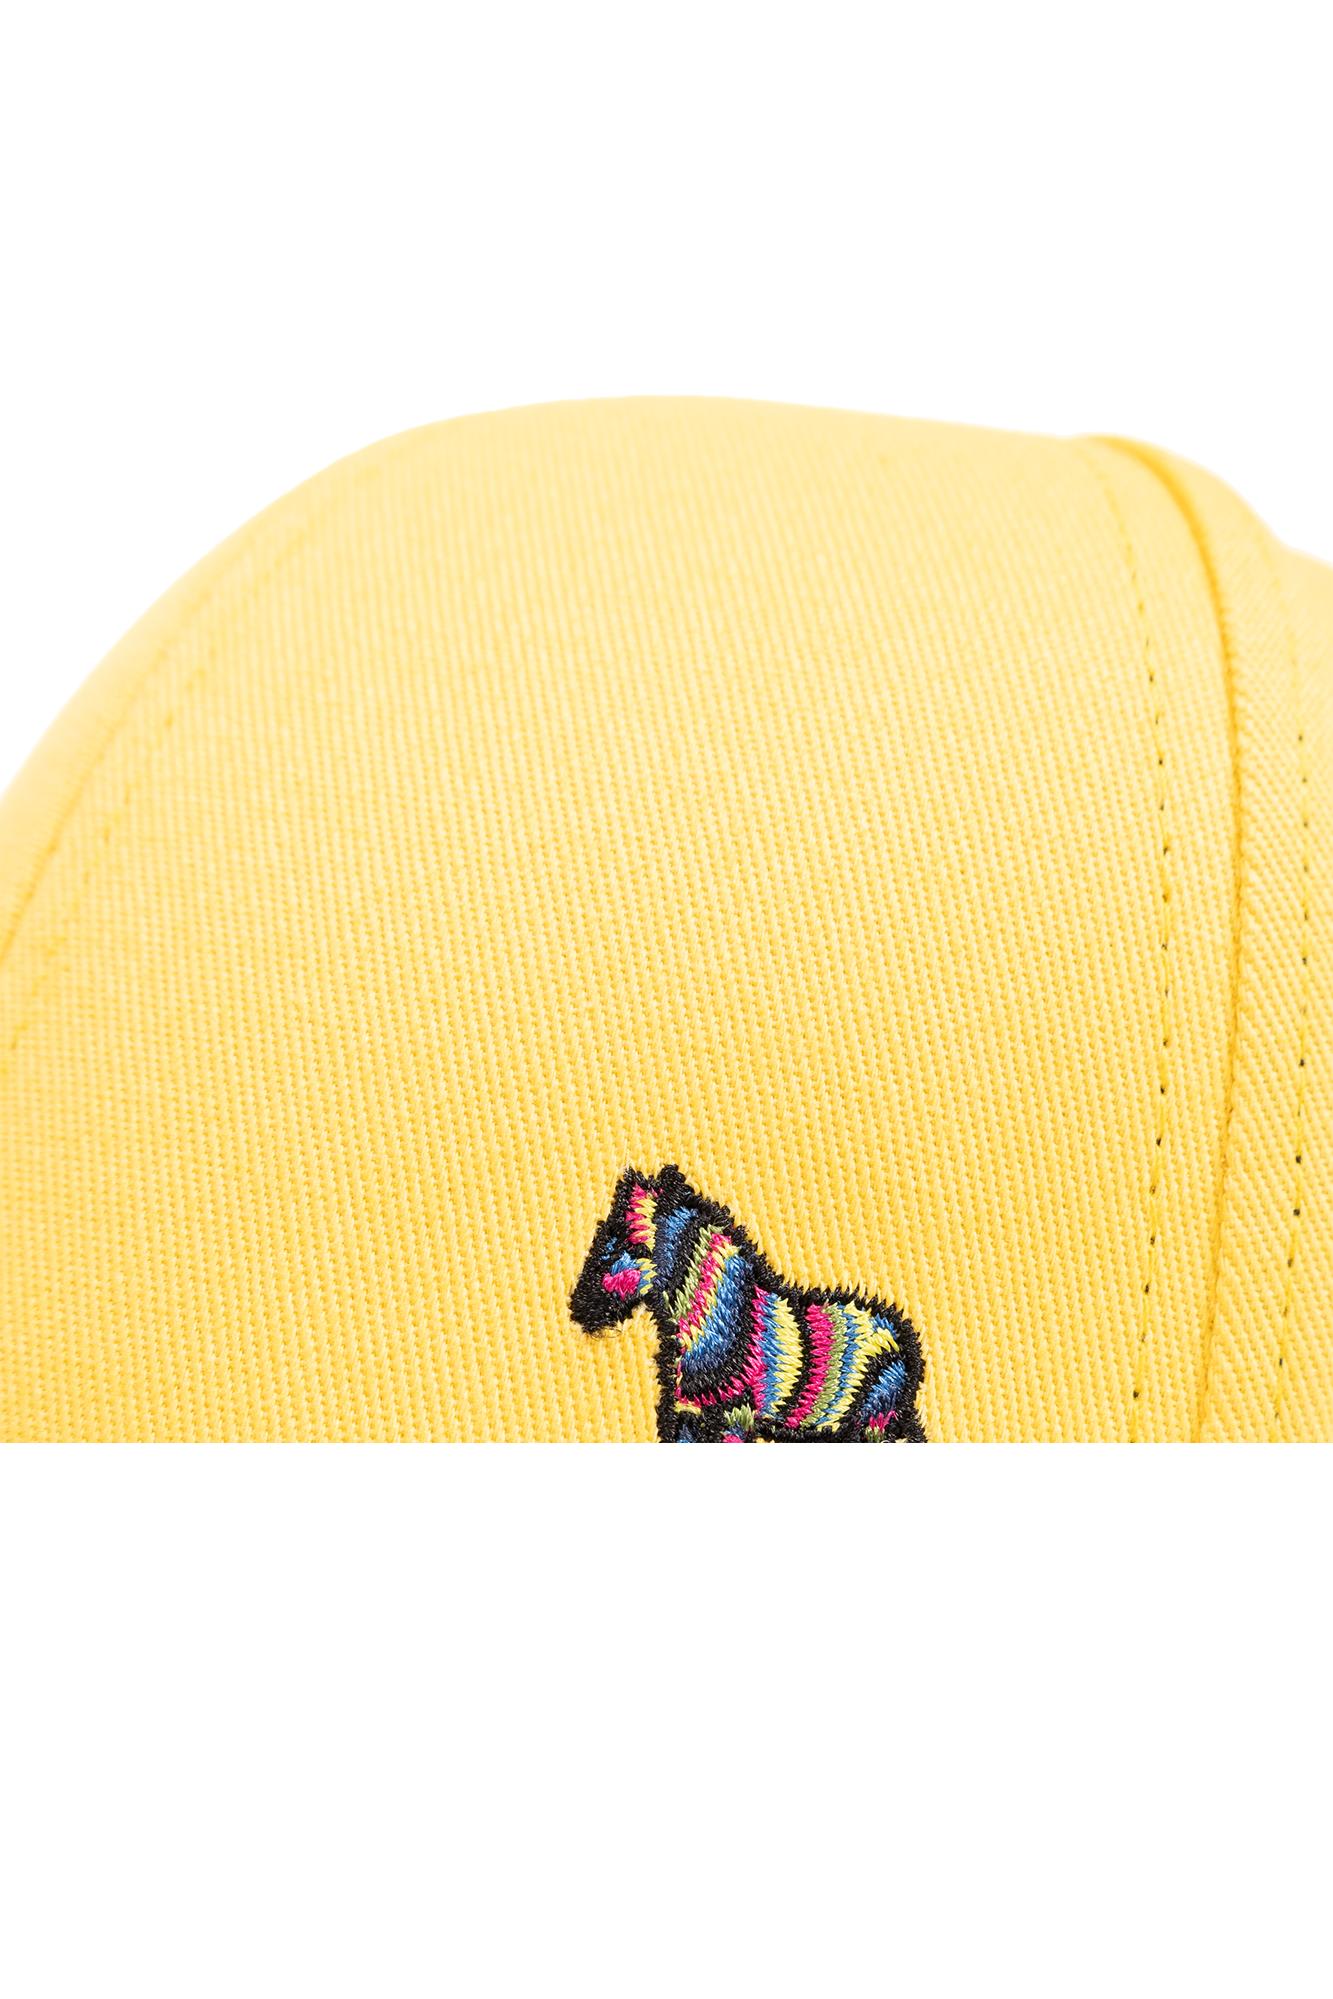 Shop Ps By Paul Smith Ps Paul Smith Baseball Cap In Yellow